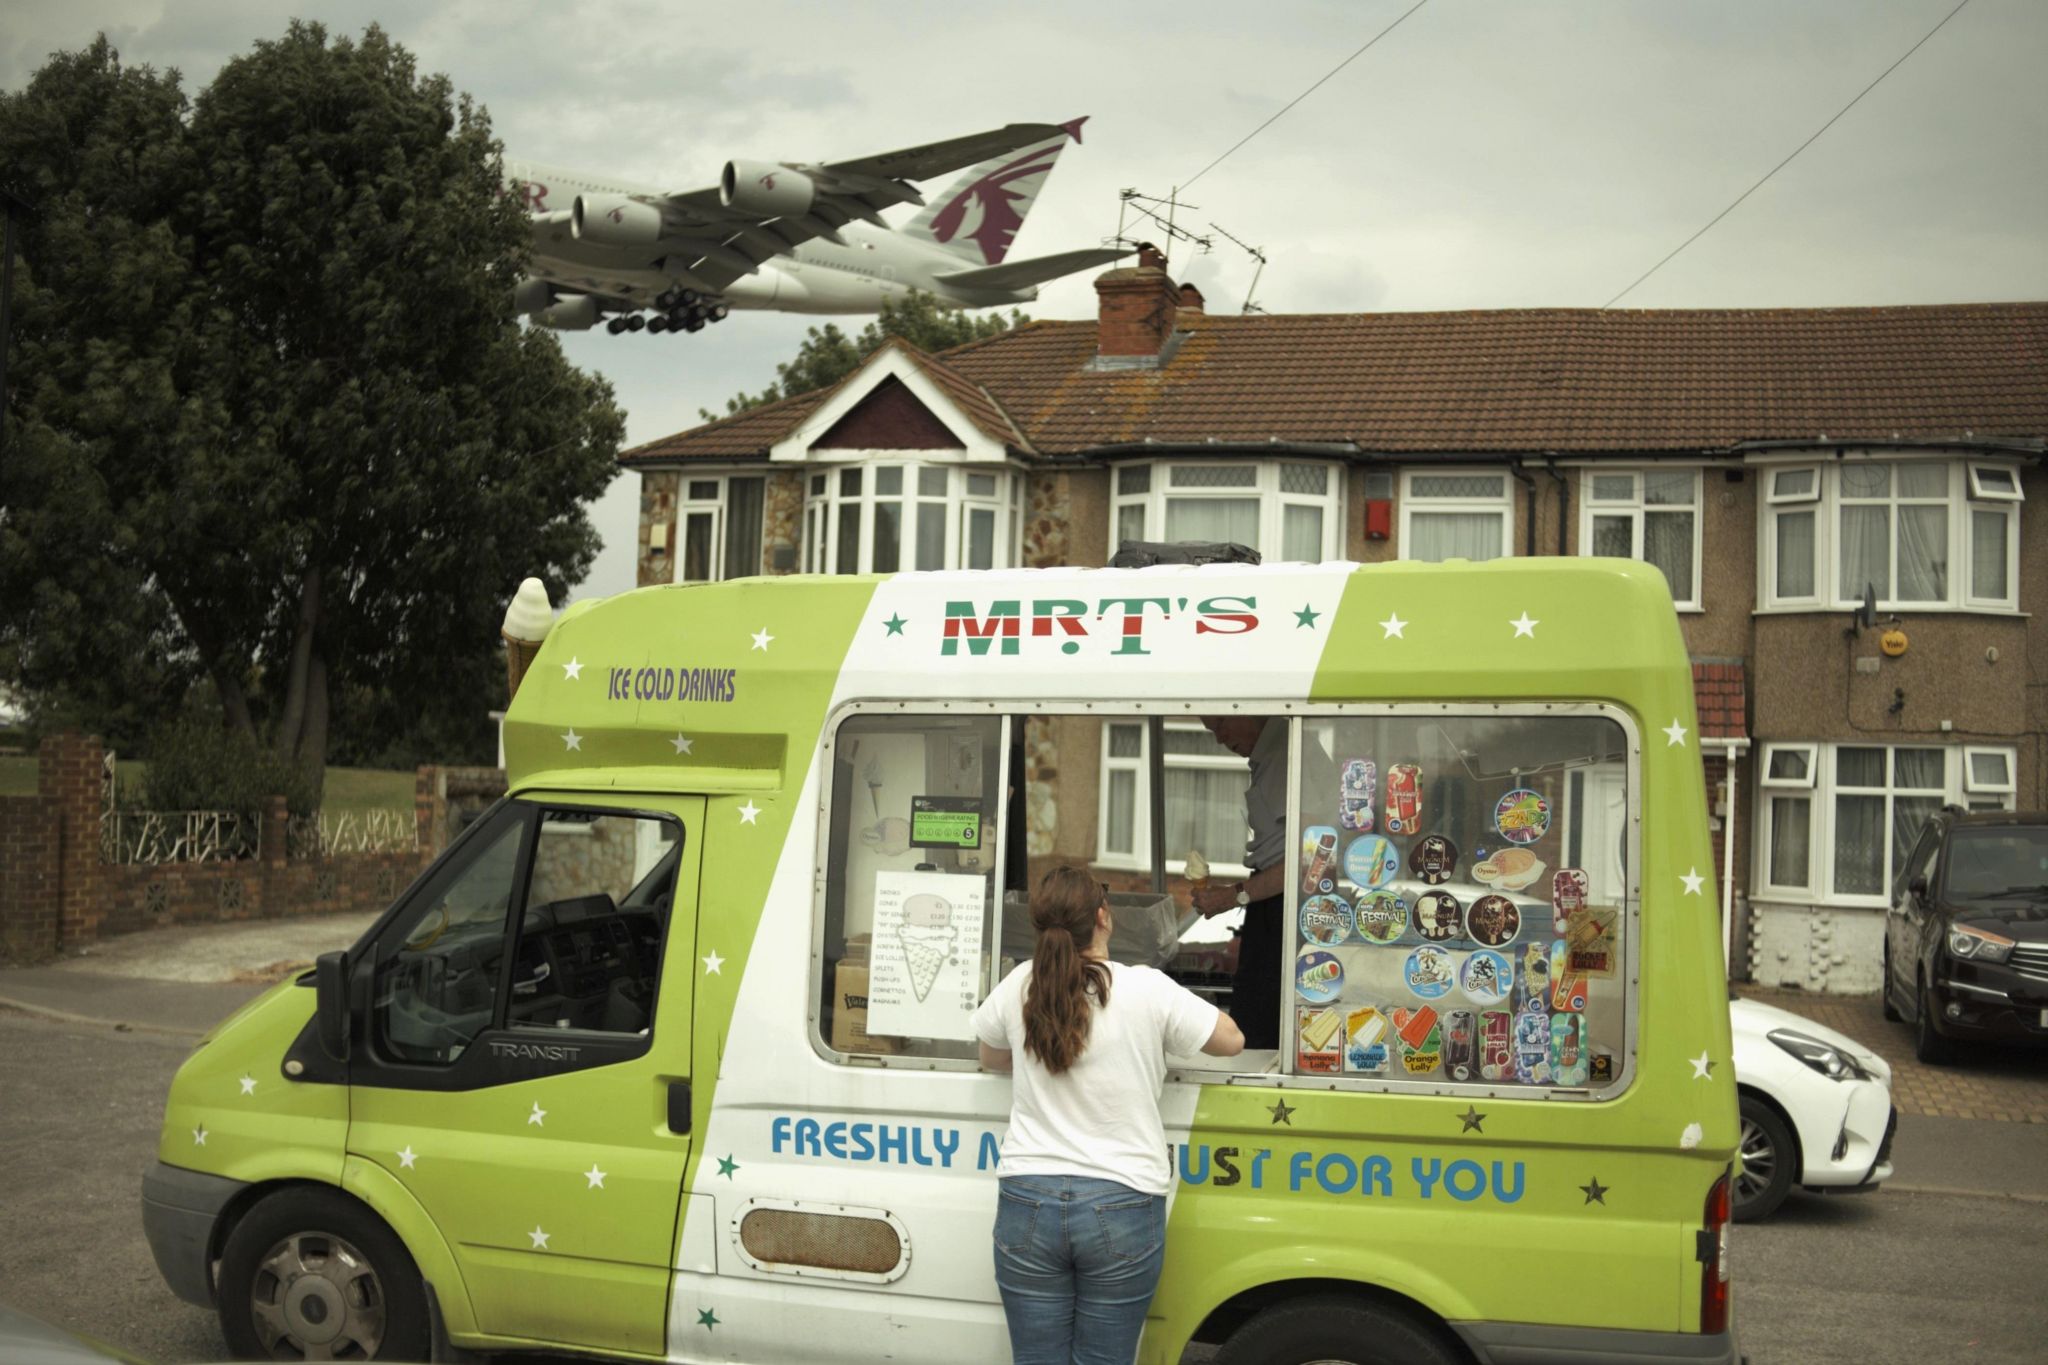 Woman buy ice cream from ice cream van with plane in background